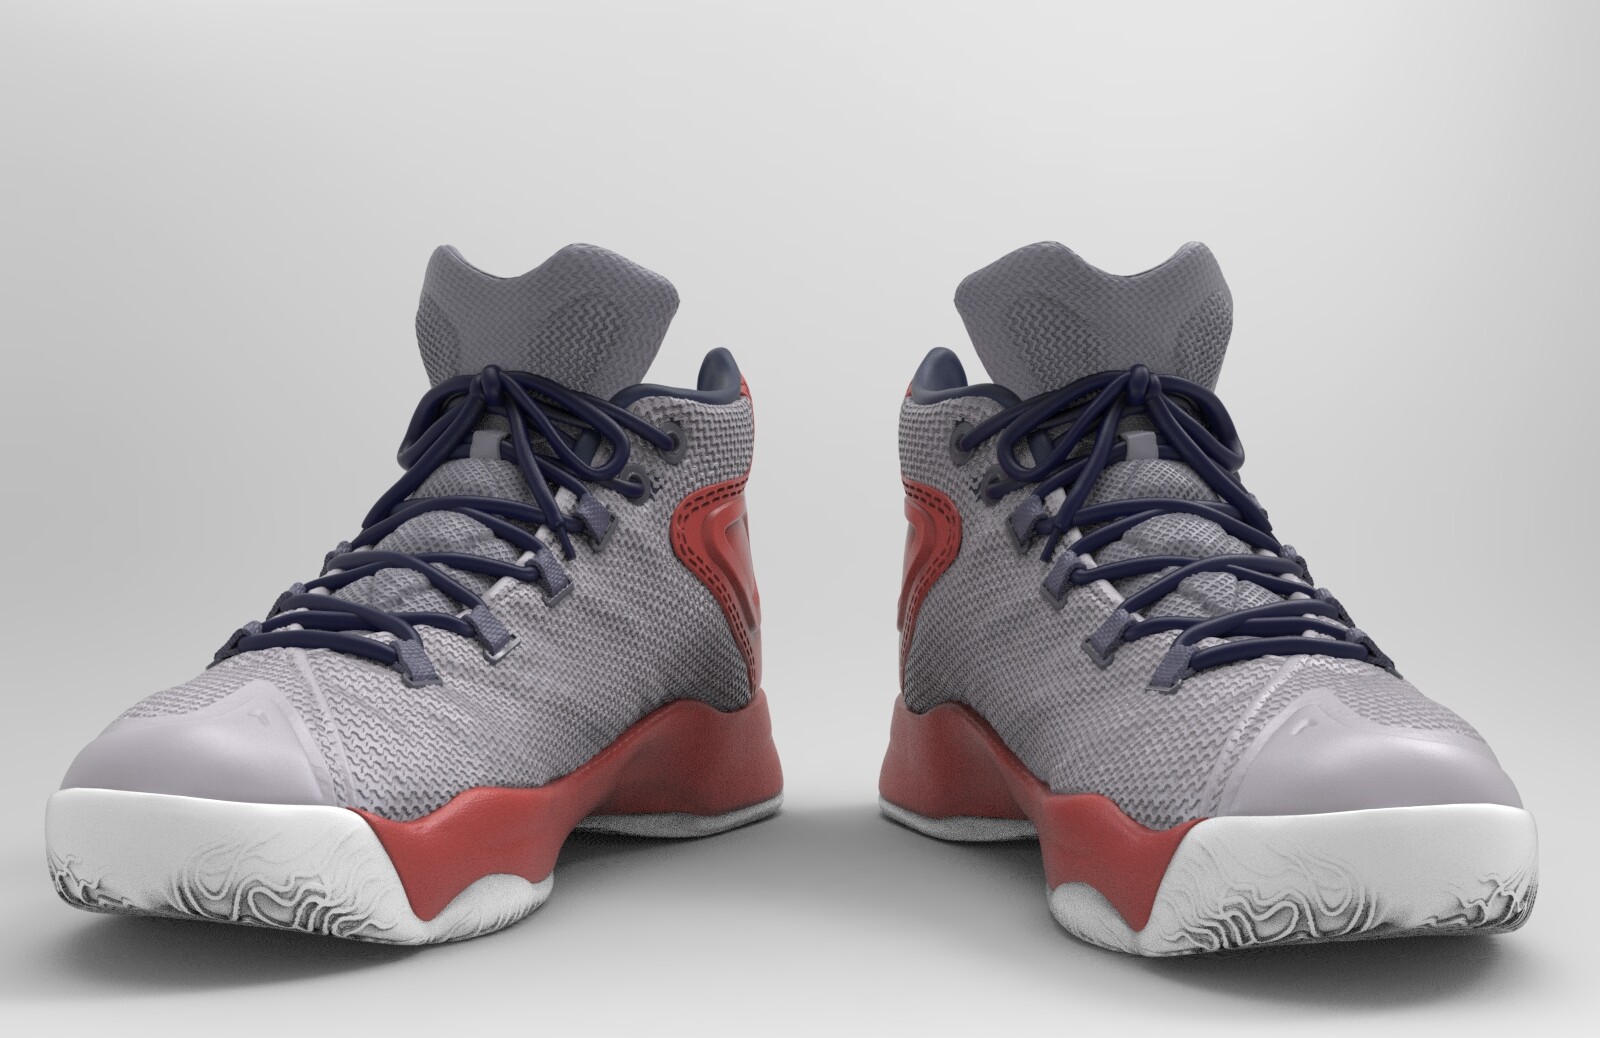 ArtStation - Basketball Shoes -Nike-Air-Carmelo Anthony - Sneakers ...